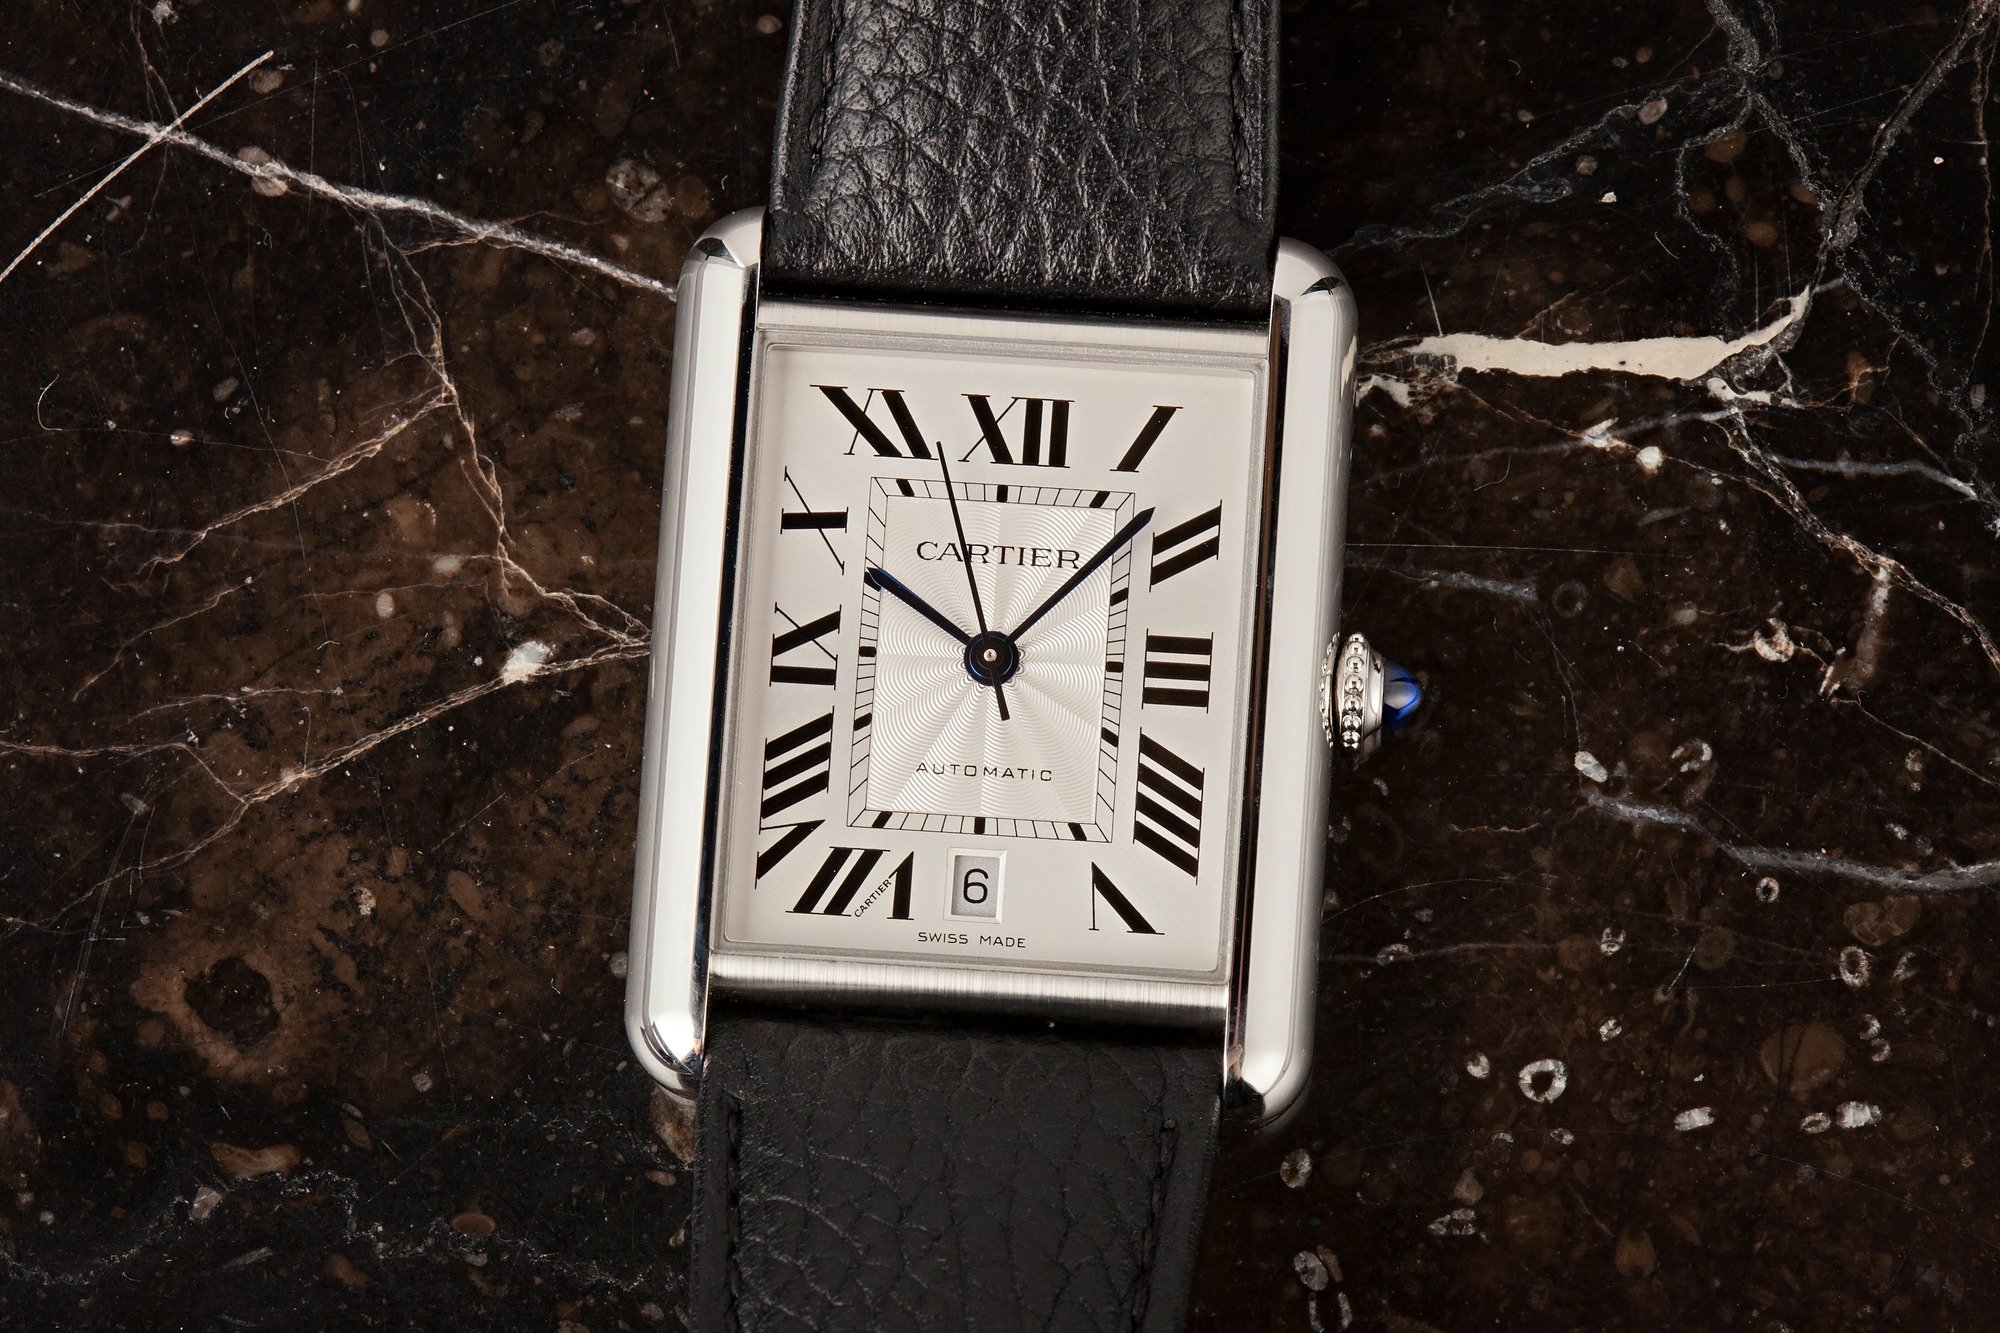 Cartier Watch Serial Numbers Guide - Bob's Watches